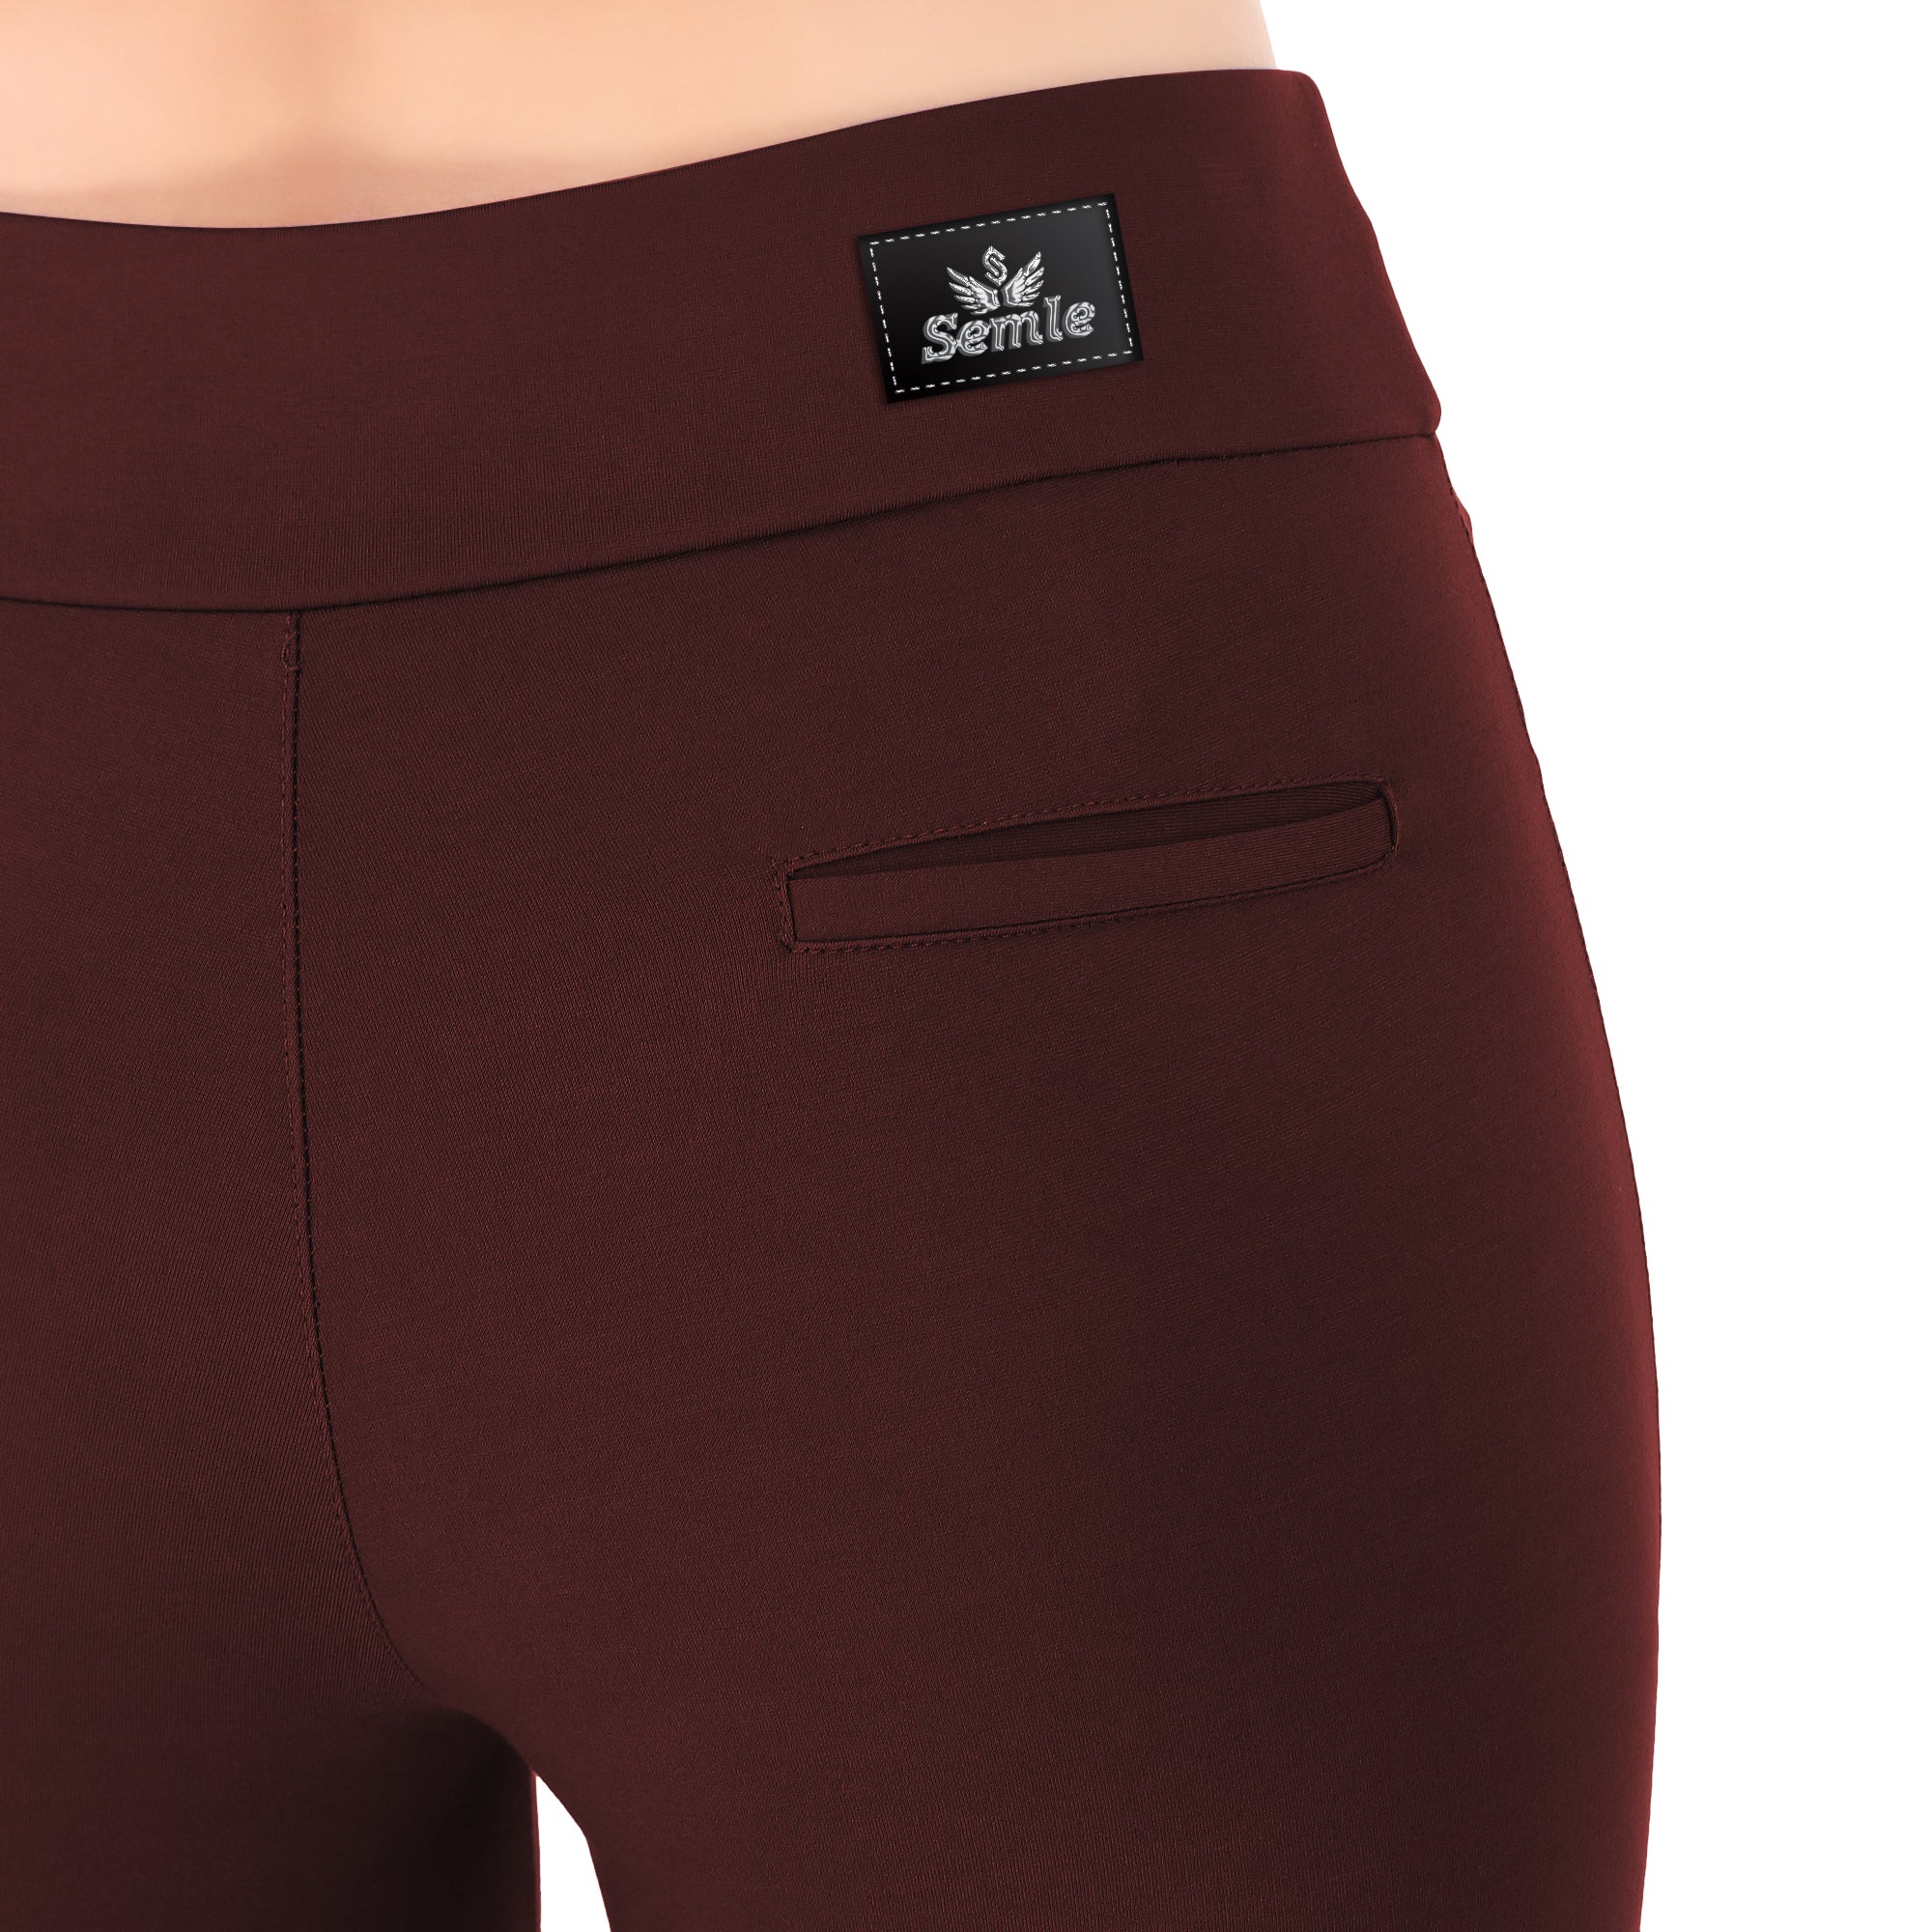 Most Comfortable Women's Mid-Waist Jeggings with 2 Front Pockets - Maroon 